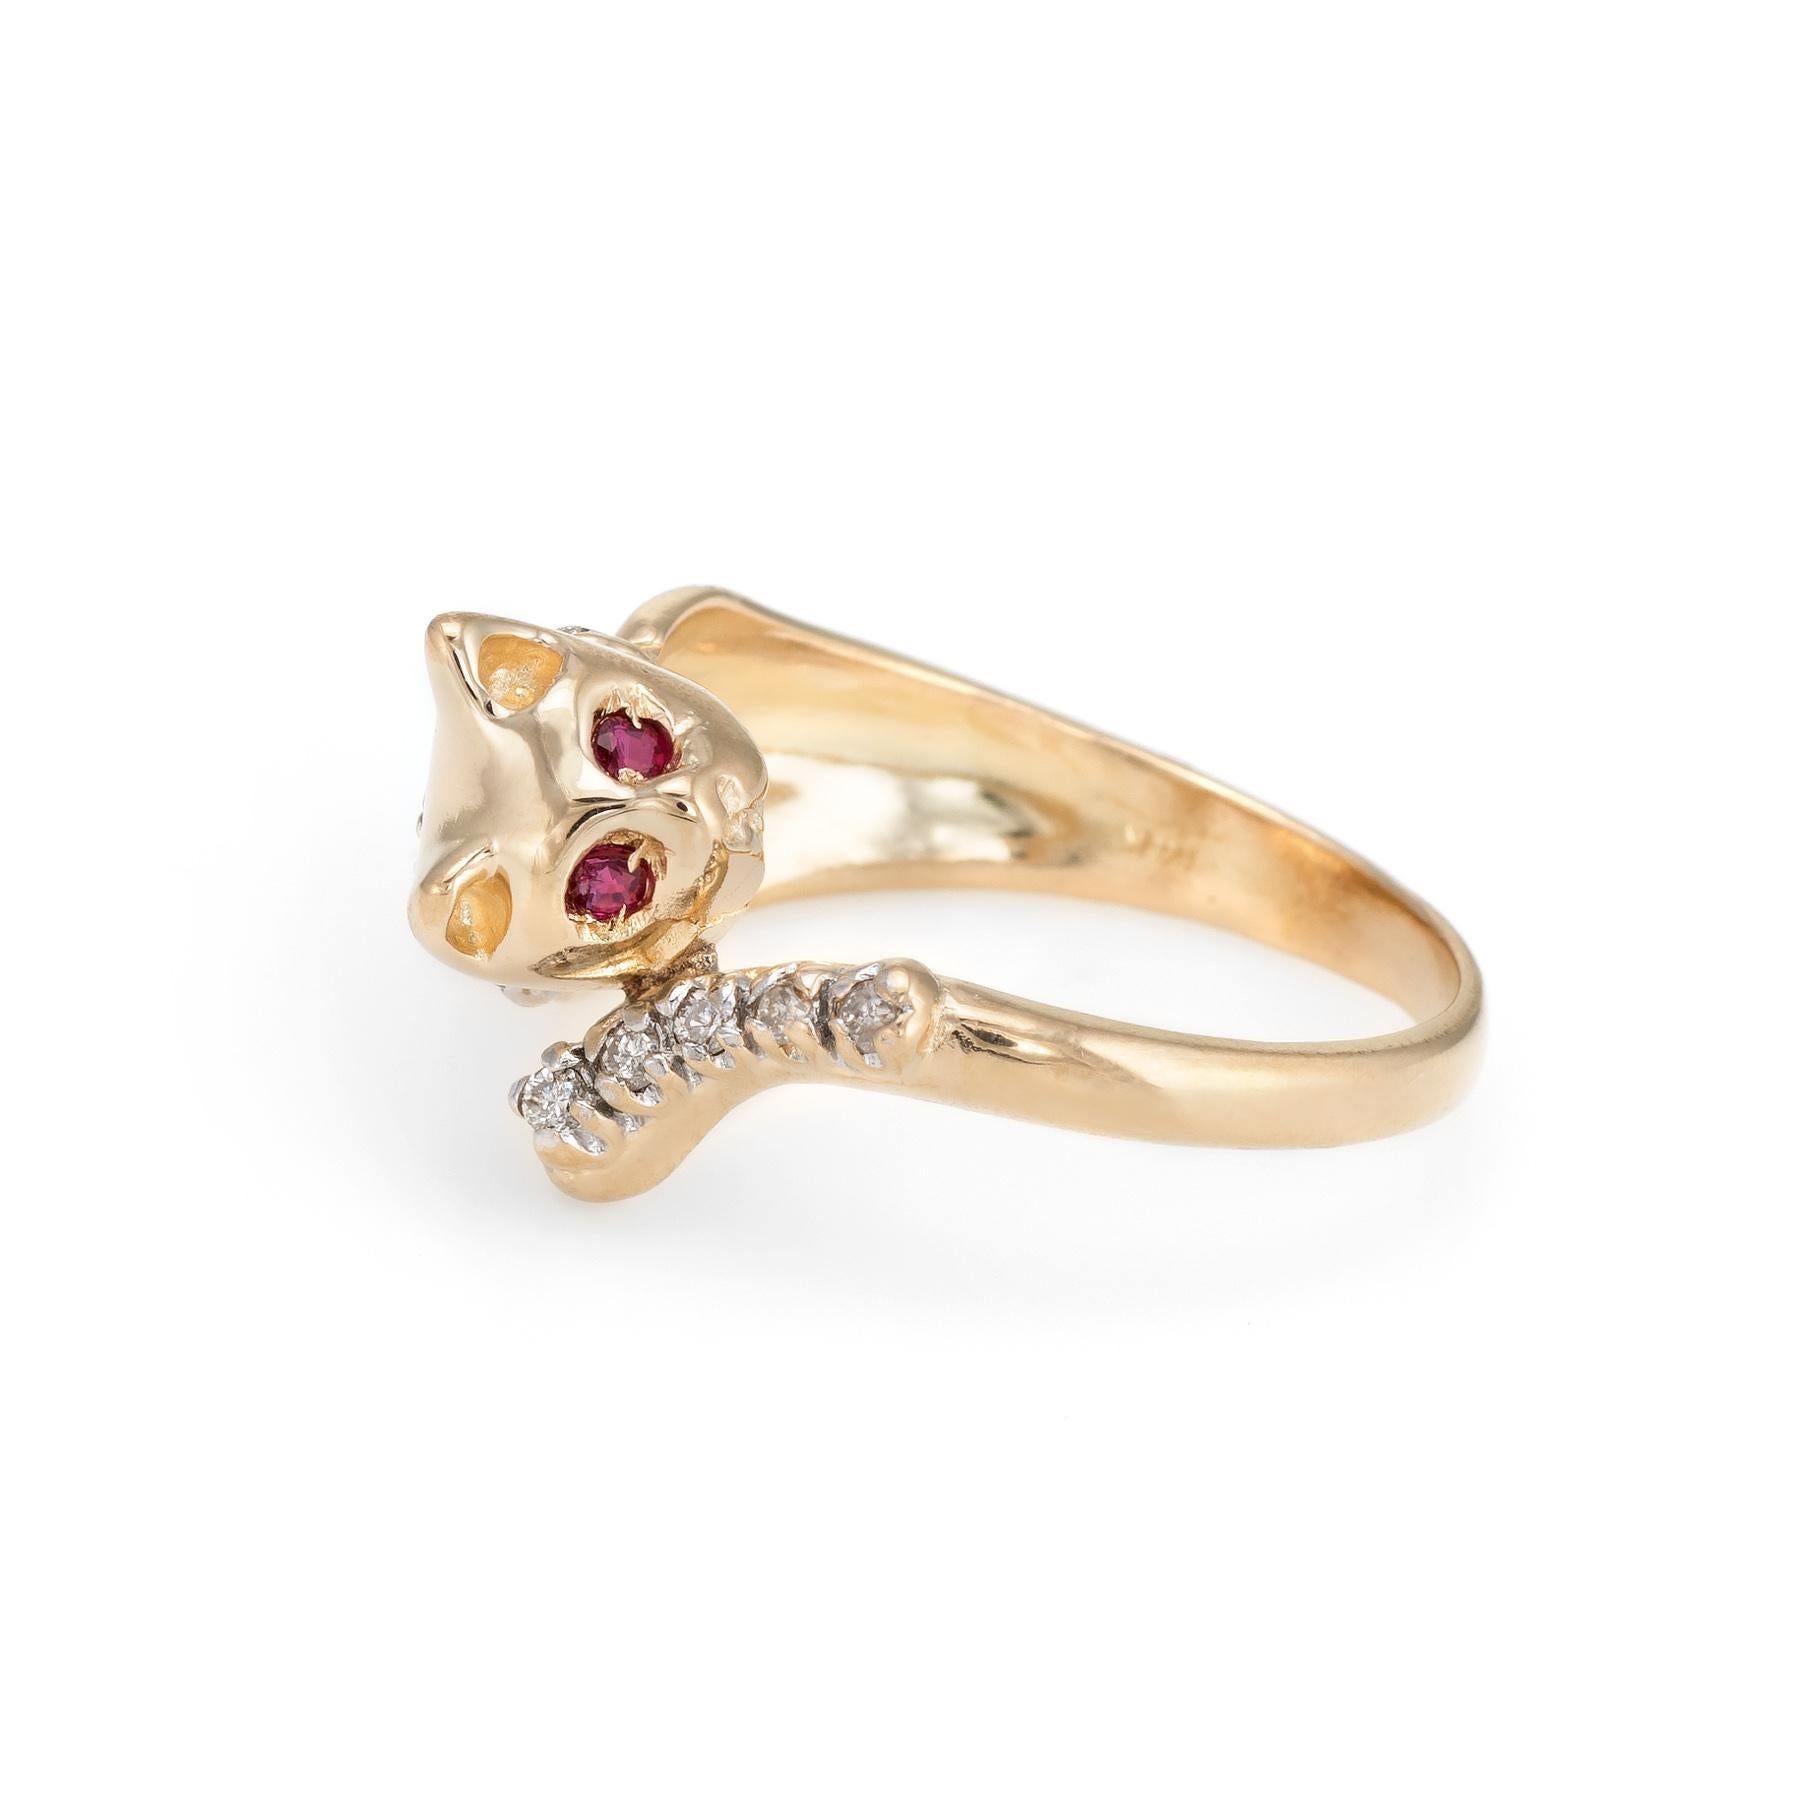 Finely detailed vintage kitty cat ring, crafted in 14 karat yellow gold. 

10 round brilliant cut diamonds total an estimated 0.05 carats (estimated at H-I color and SI2-I1 clarity). The eyes are set with two estimated 0.01 carat rubies.  

The